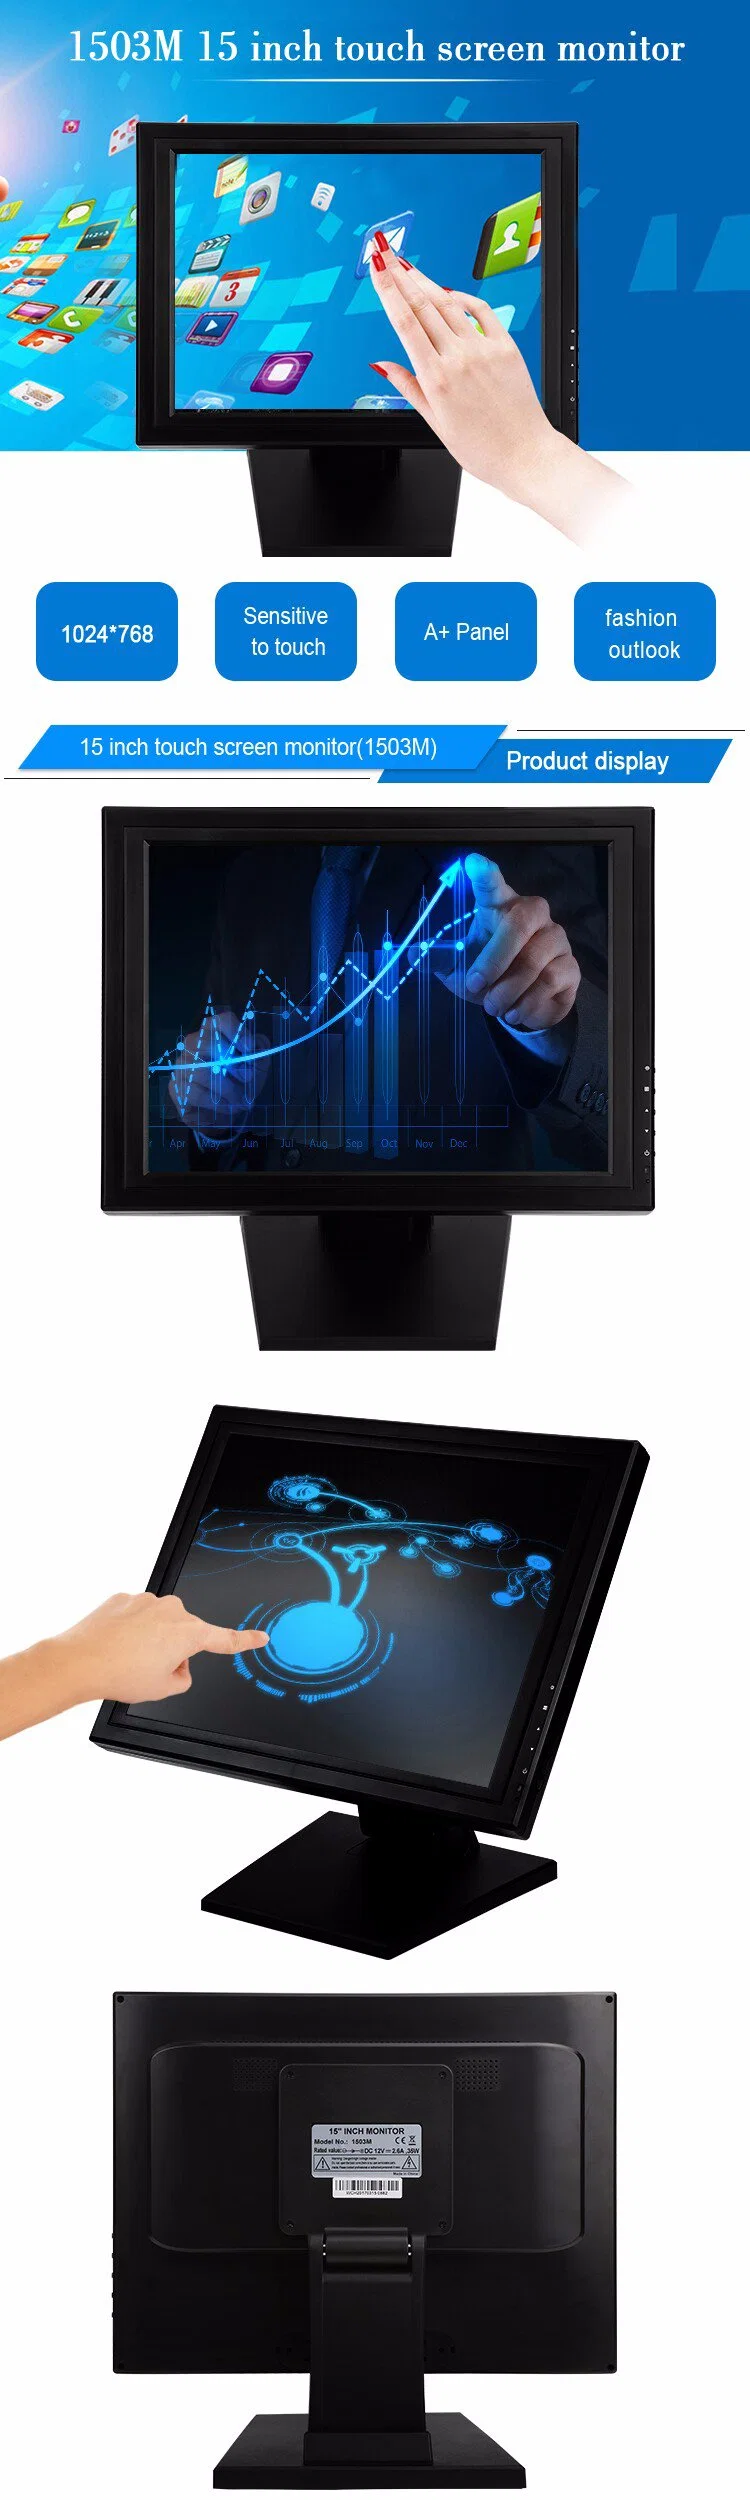 Resistive Model 1503m VGA USB 15 Inch TFT Type Touchscreen / Touch Screen LCD Monitor